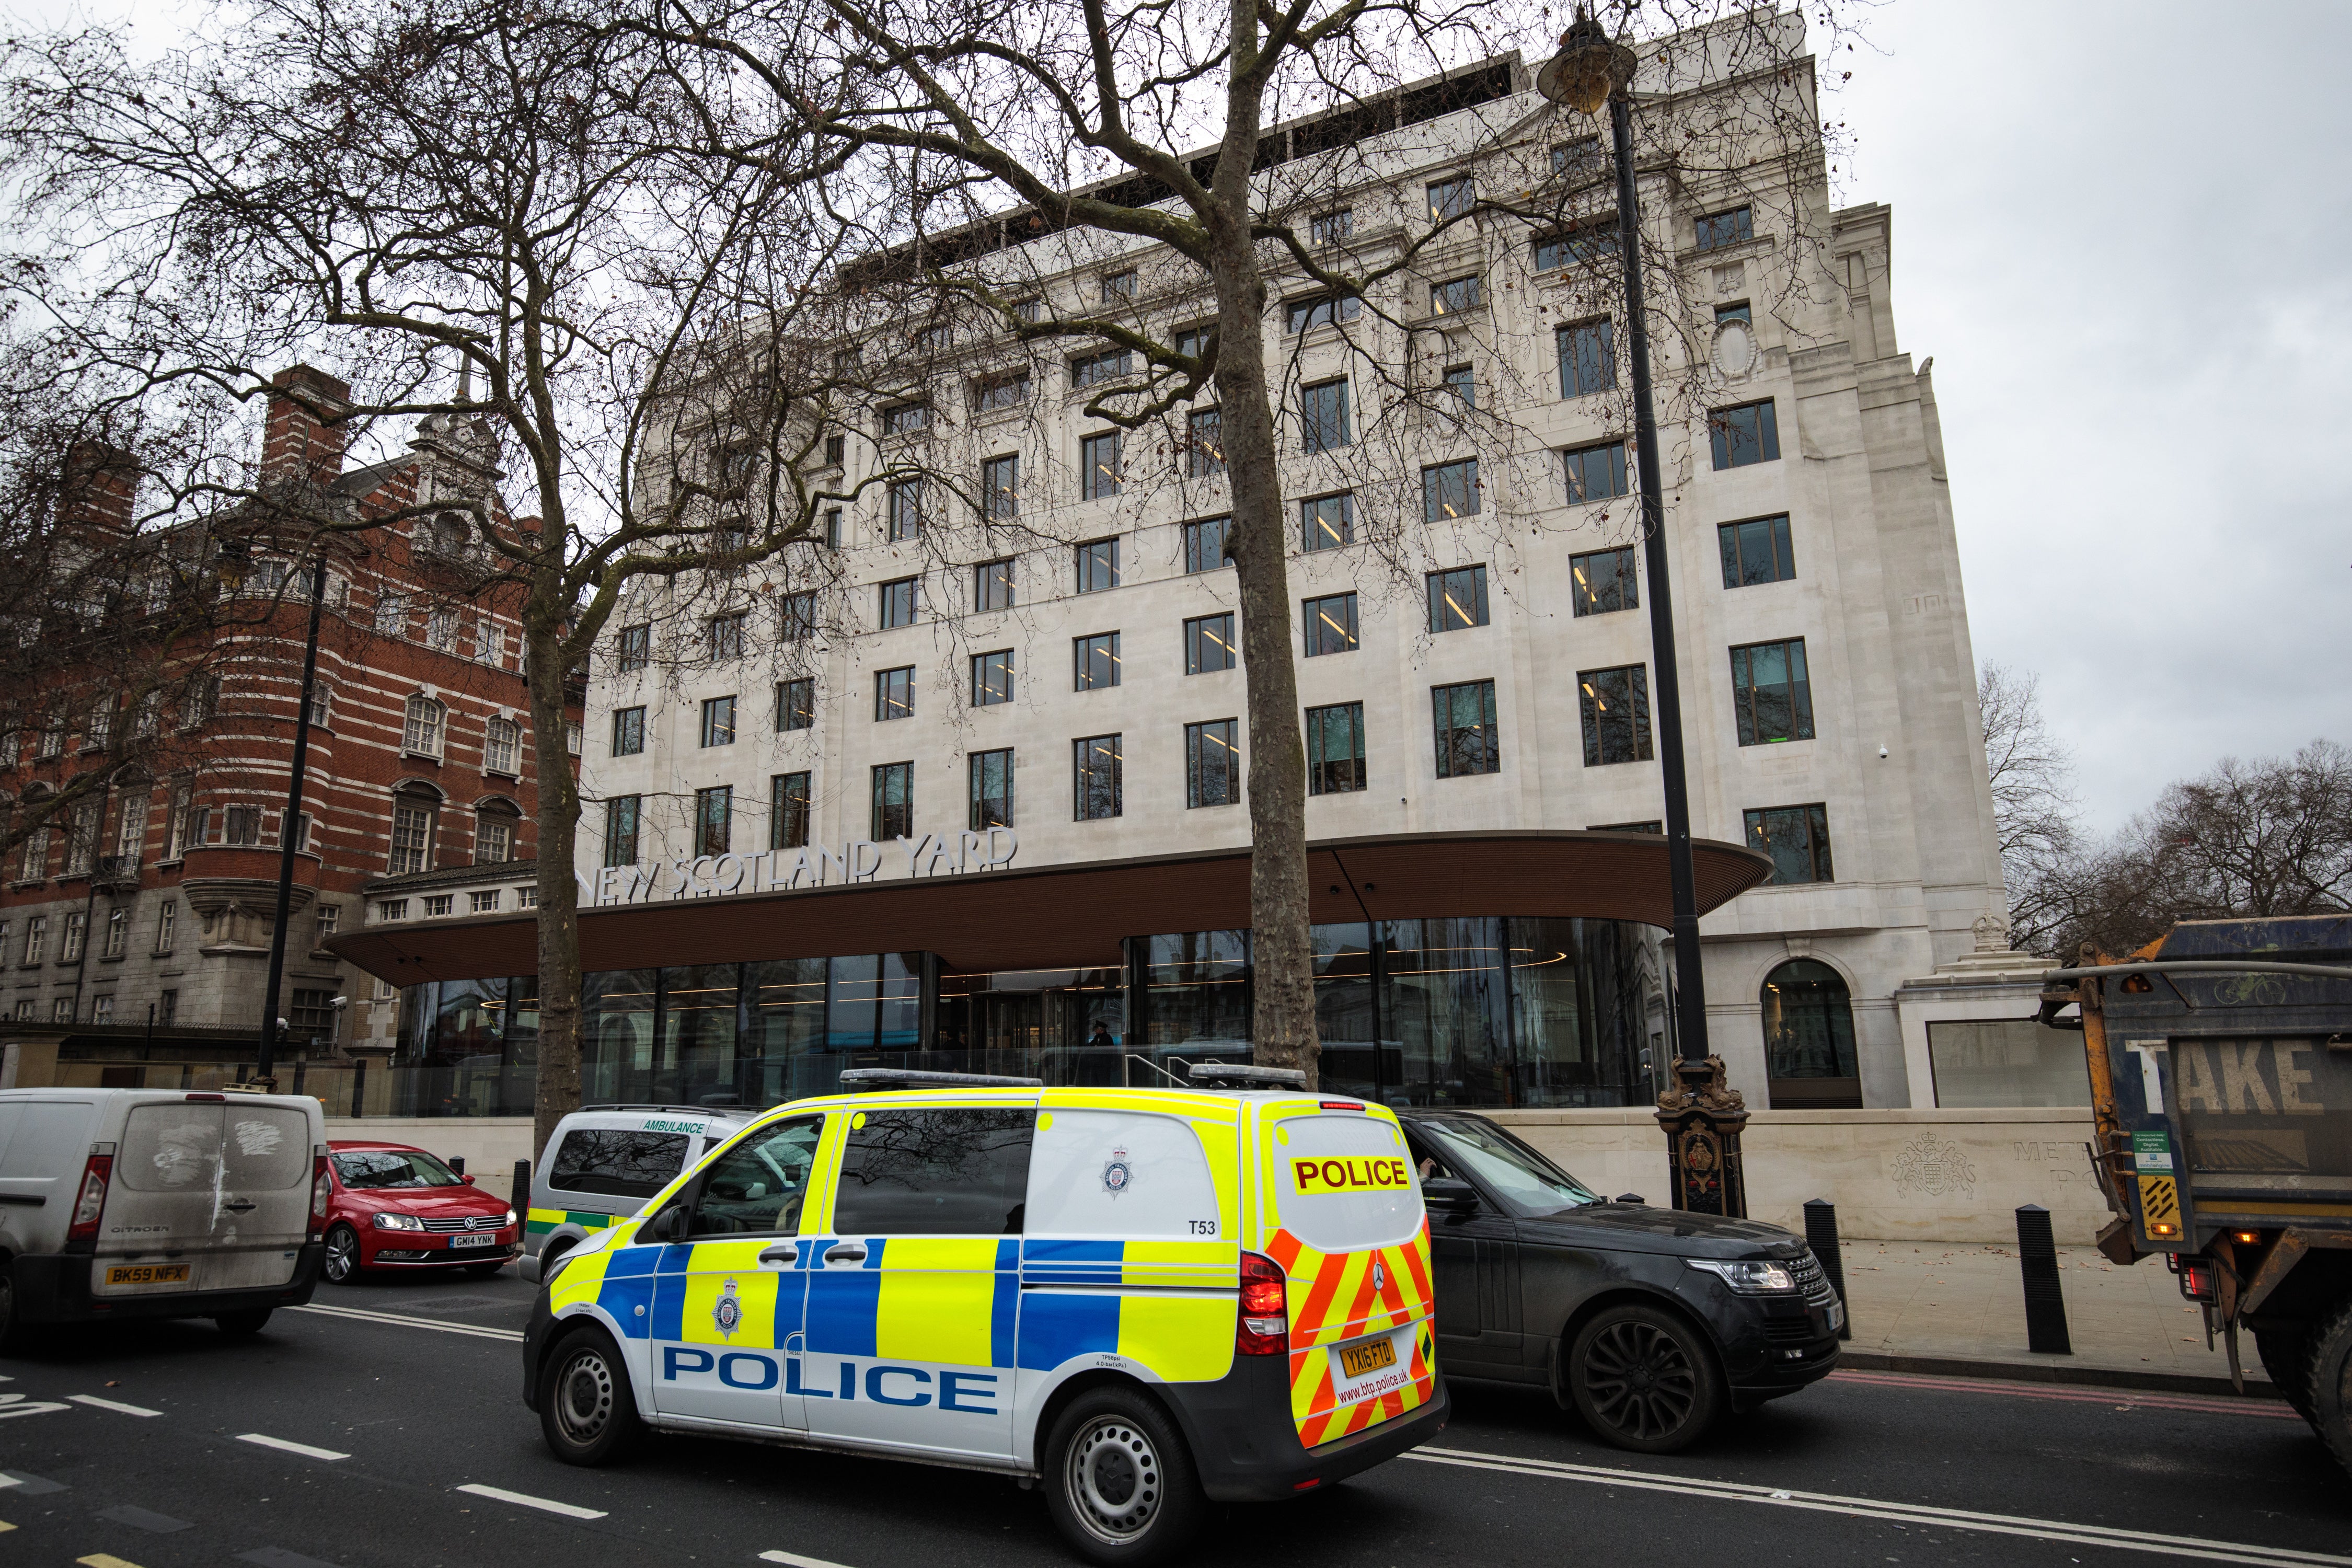 Police accused the suspect of ‘making threats to kill’ and ‘making bomb hoax threats’